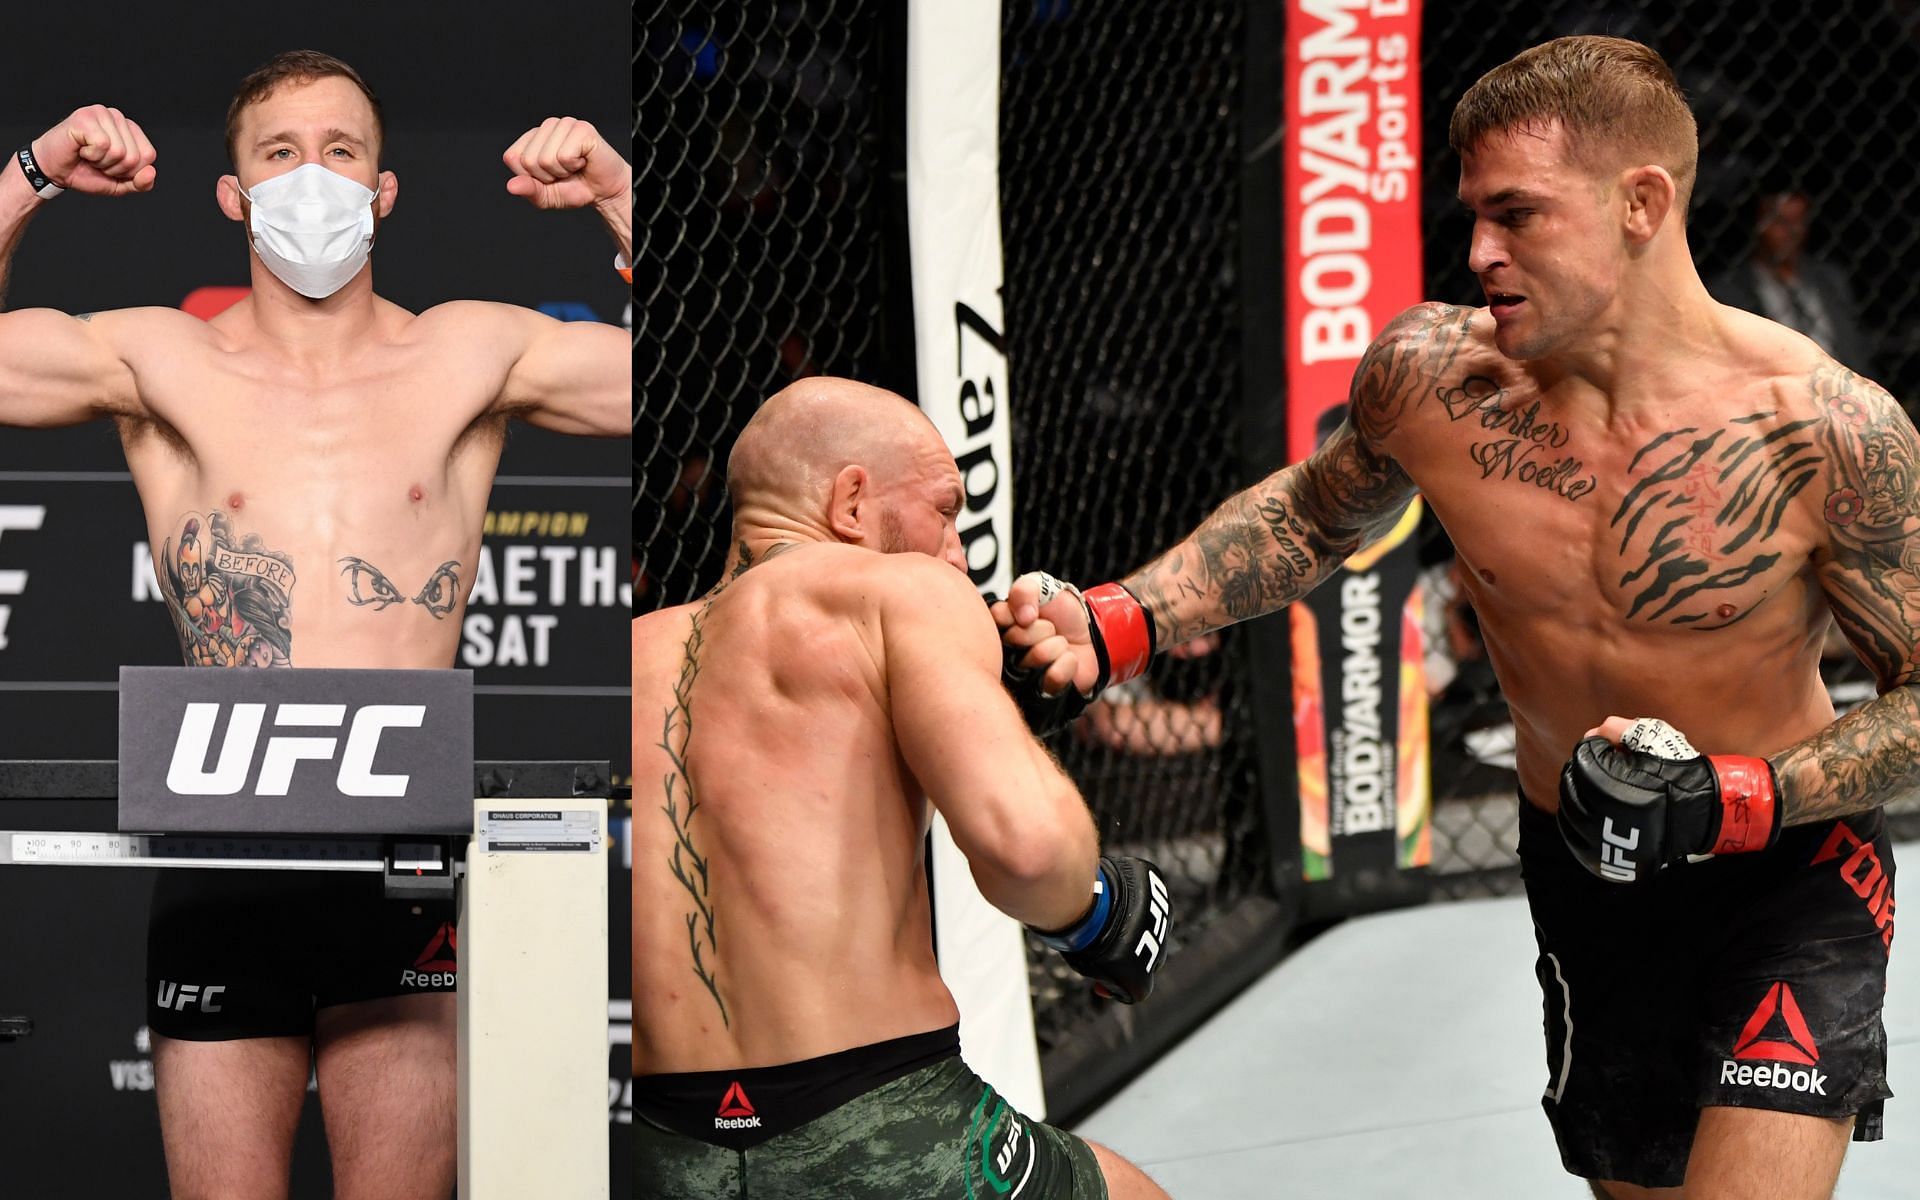 Justin Gaethje (left) and action from the Dustin Poirier vs. Conor McGregor 2 UFC 257 main event (right)